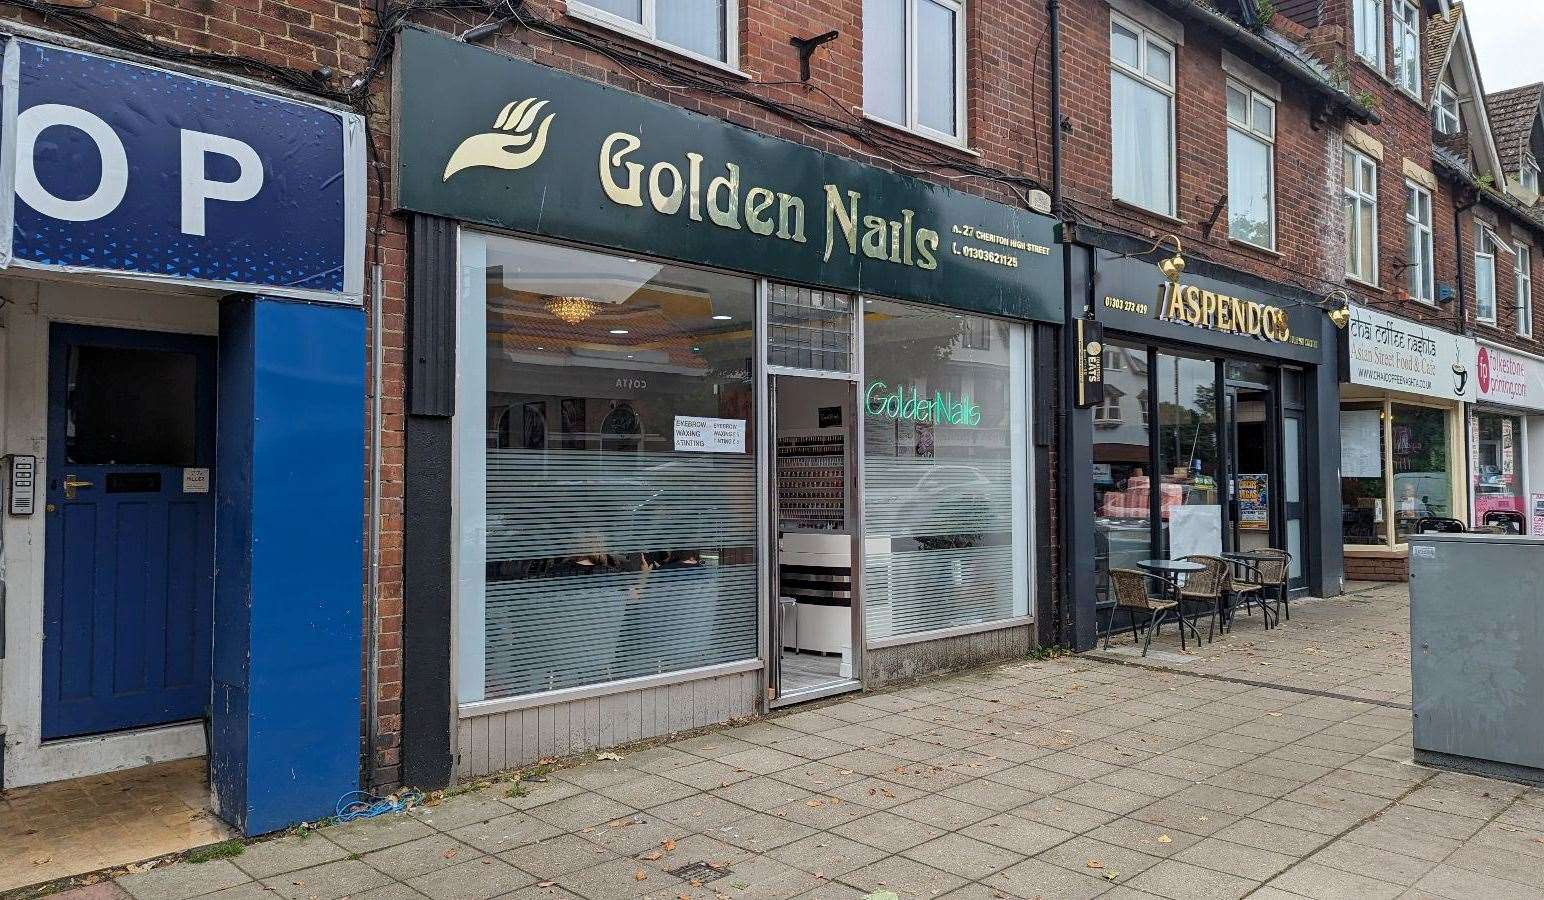 The door to Golden Nails was smashed during the disturbance